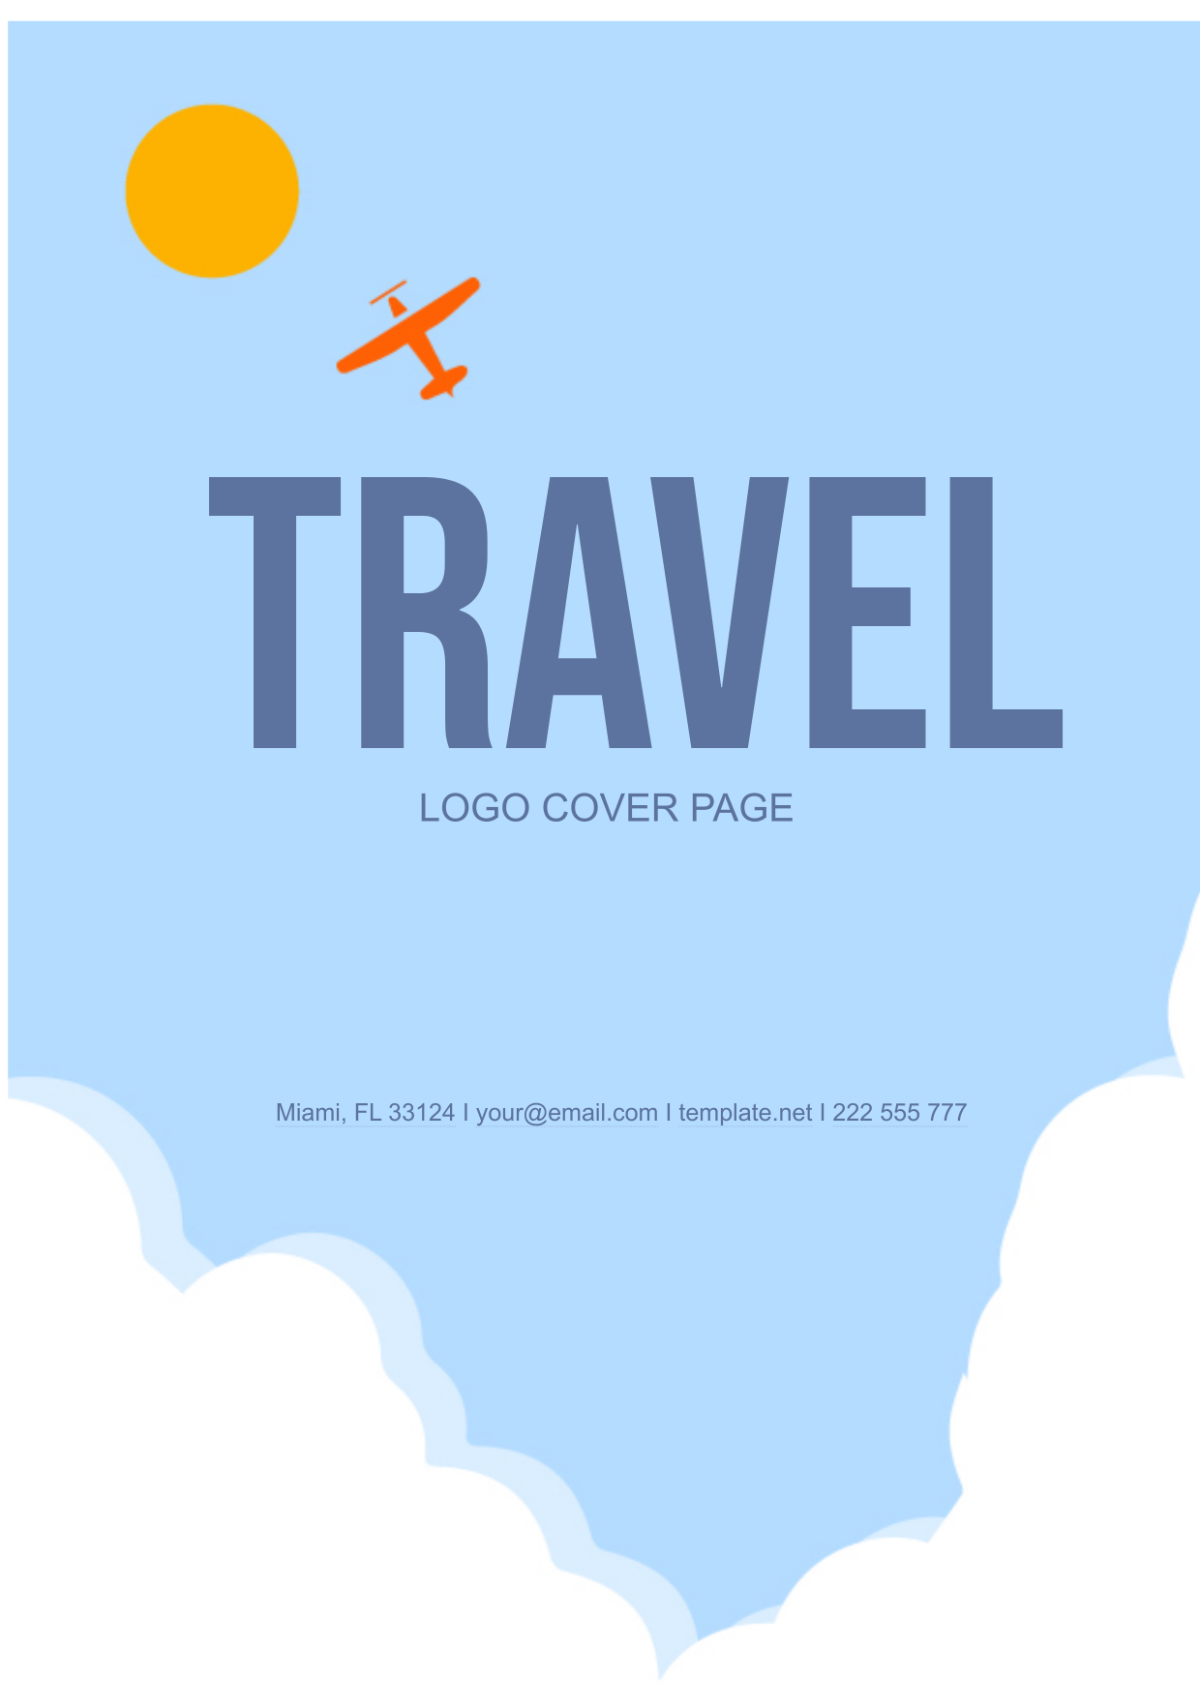 Free Travel Logo Cover Page Template